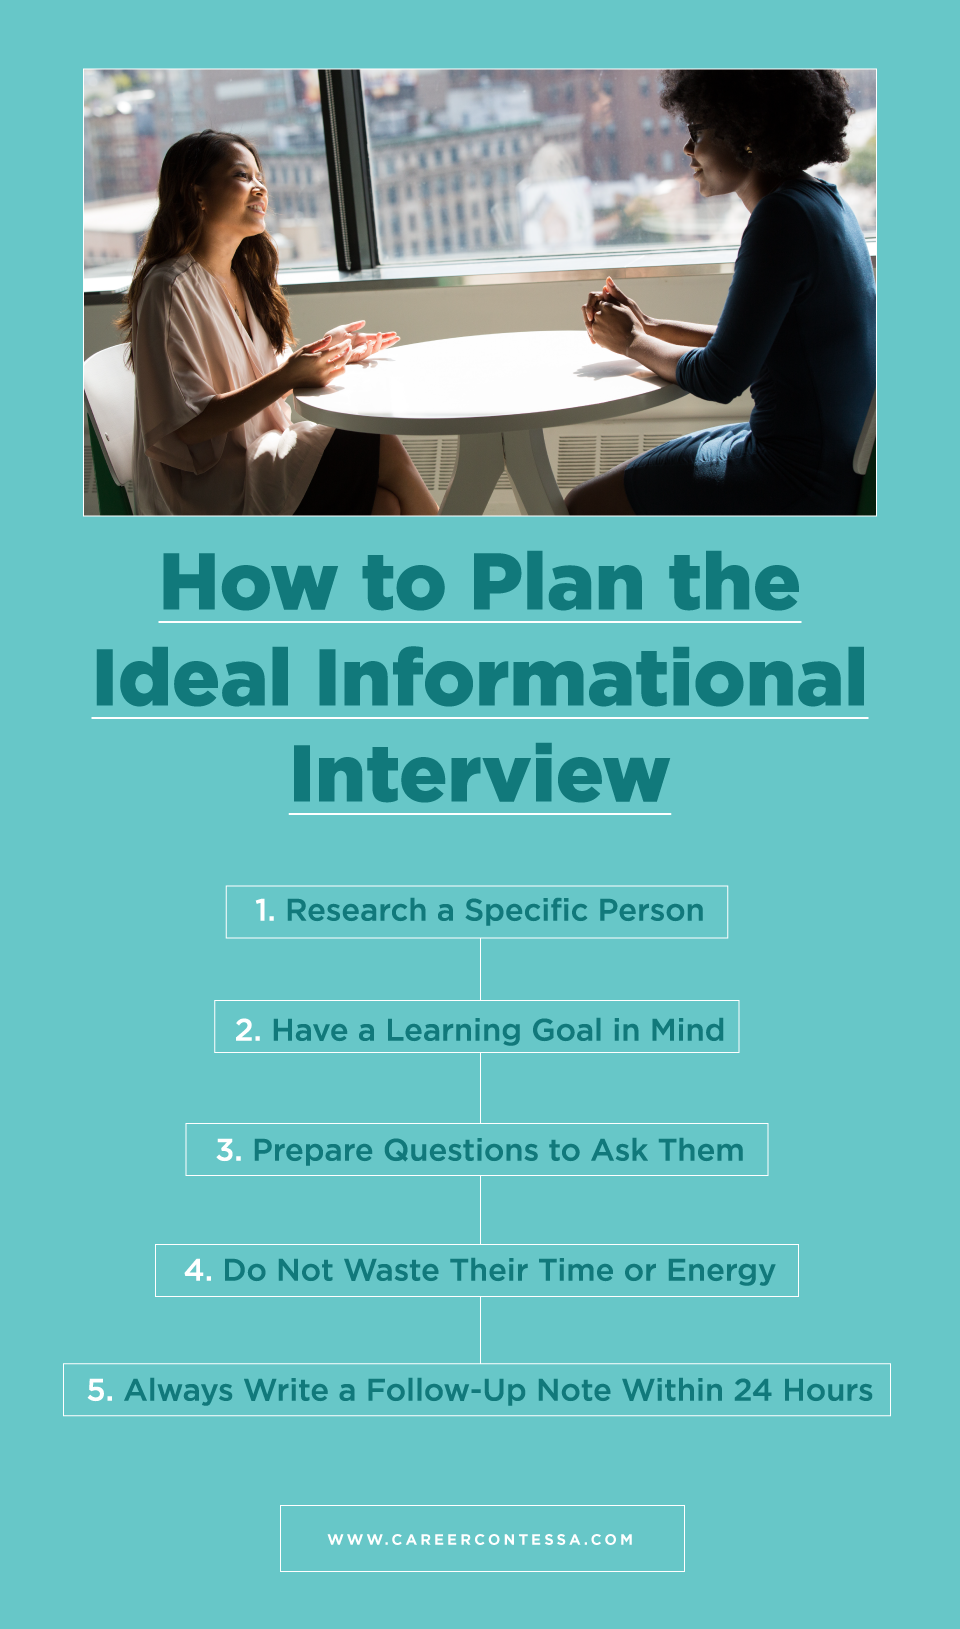 Informational Interview:. Have not heard about it? Okay, Fine. In